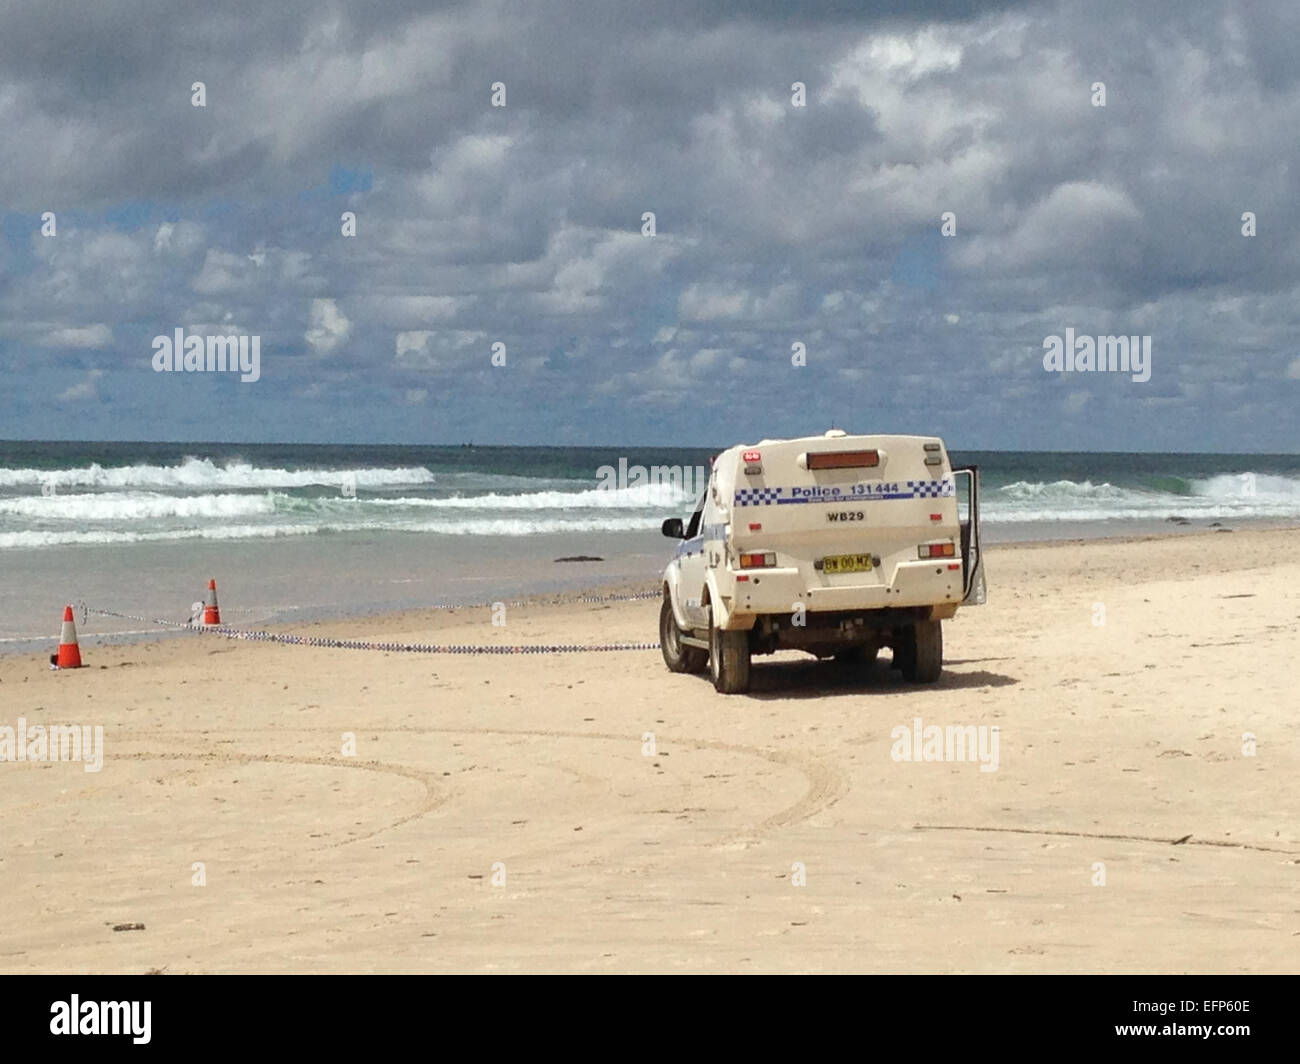 Shelly Beach, Ballina, NSW, Australia. 9th February, 2015. A man has died following a shark attack at Shelly Beach, Ballina, NSW. It is reported the 'large' shark attacked from behind and bite off both the mans legs. The attack occured at approx 945am local time. Ballina is located 30km South of Byron Bay on the far north coast of NSW. Beaches in the area have been closed. Credit:  Ben Wyeth/Alamy Live News Stock Photo